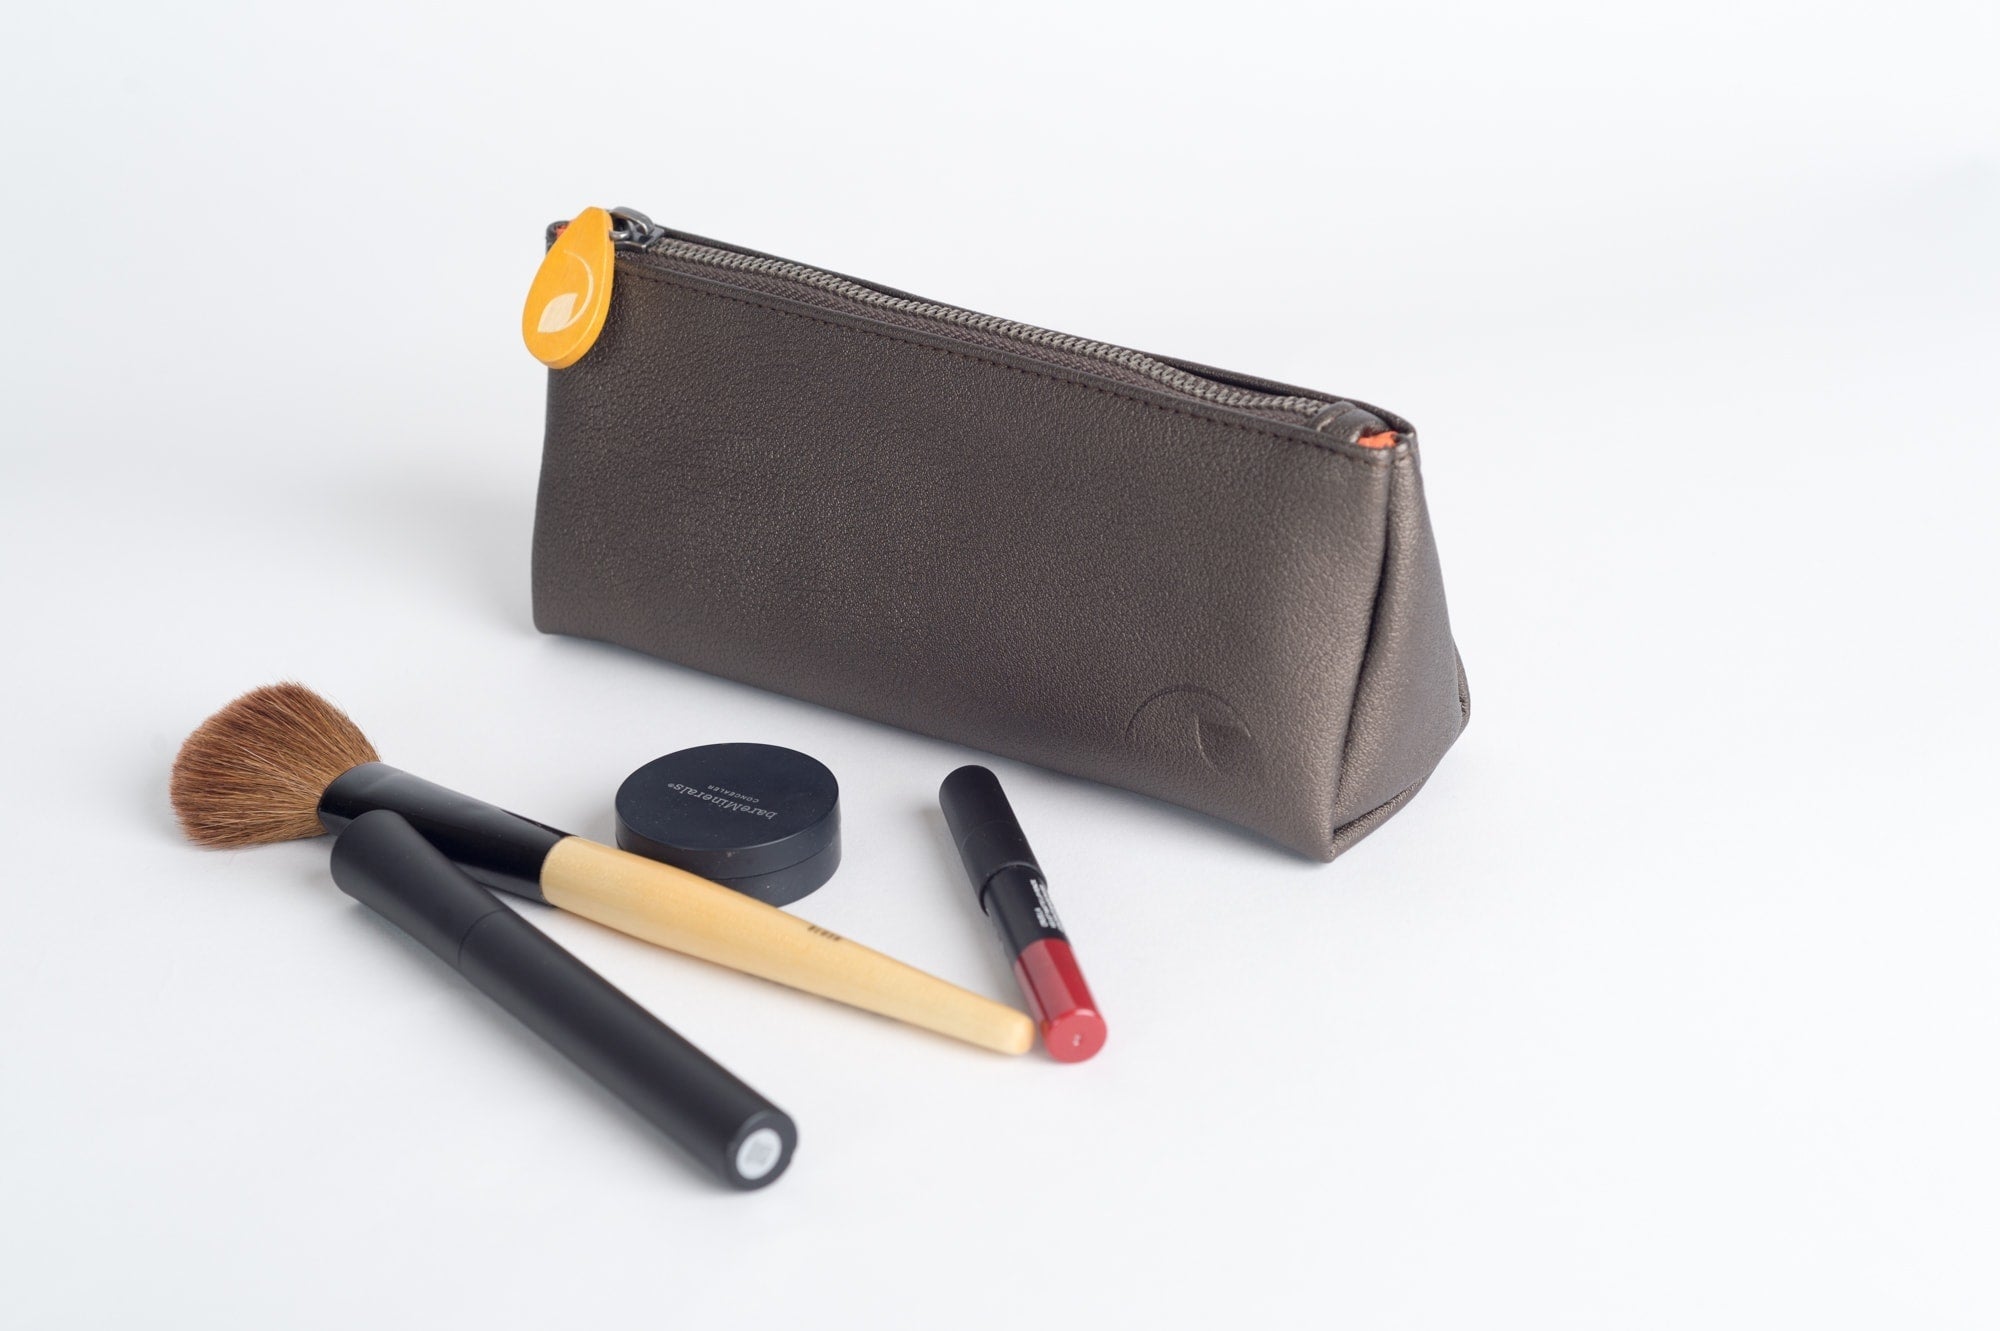 Elevate your essentials! Chic Union Pouch - vegan leather, orange lining, stands up, holds makeup, pens, brushes. Perfect gift set option. Shop sustainable accessories now!